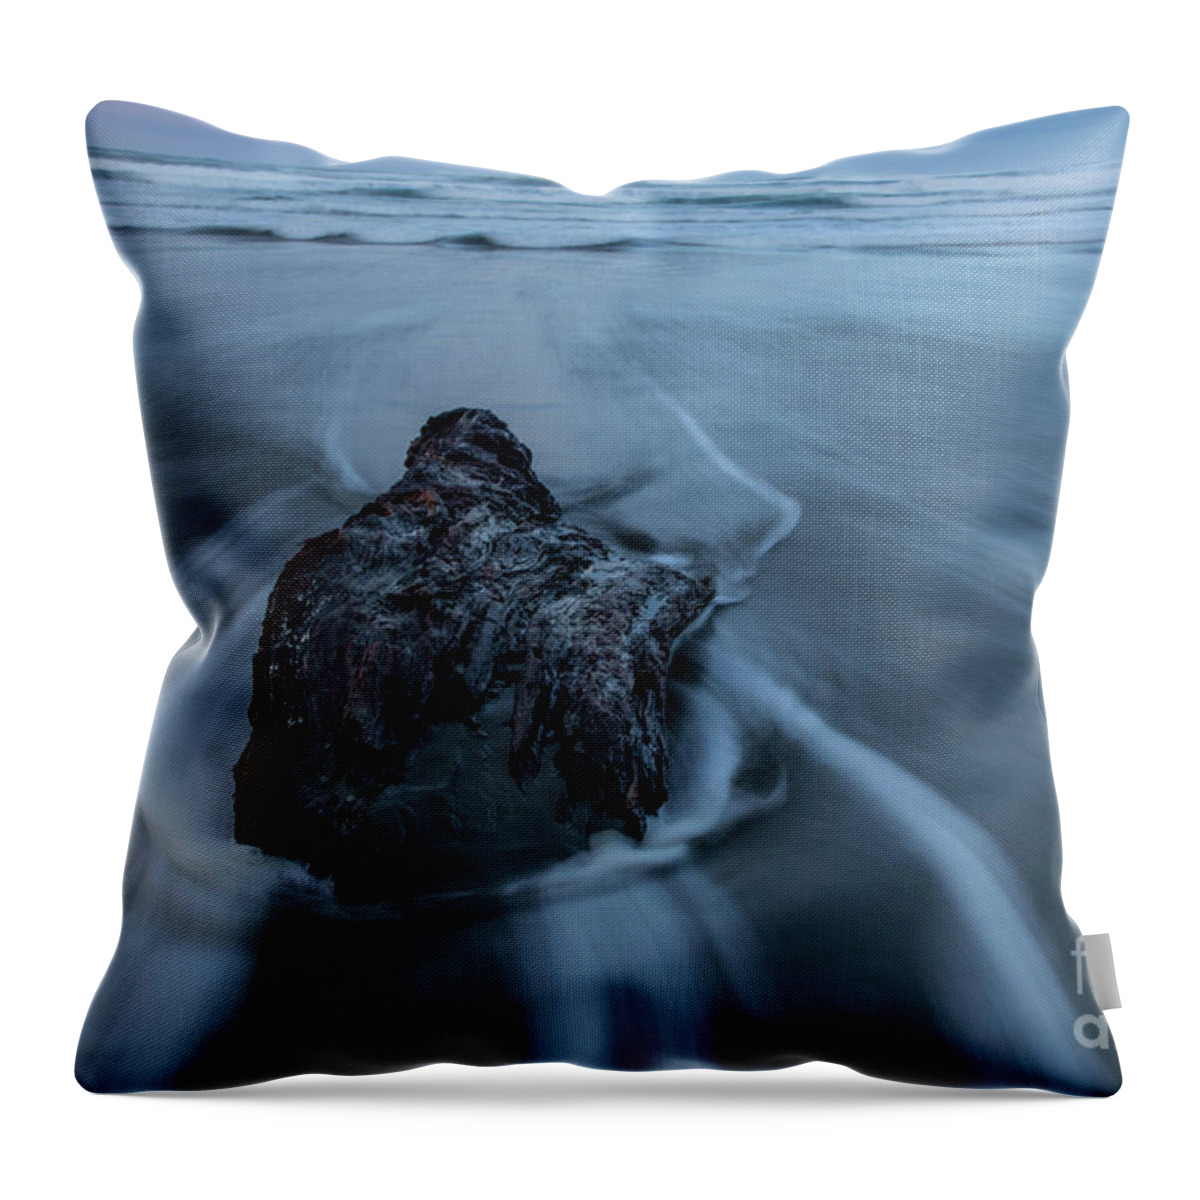 Seascape Throw Pillow featuring the digital art Steadfast by Phil Dyer